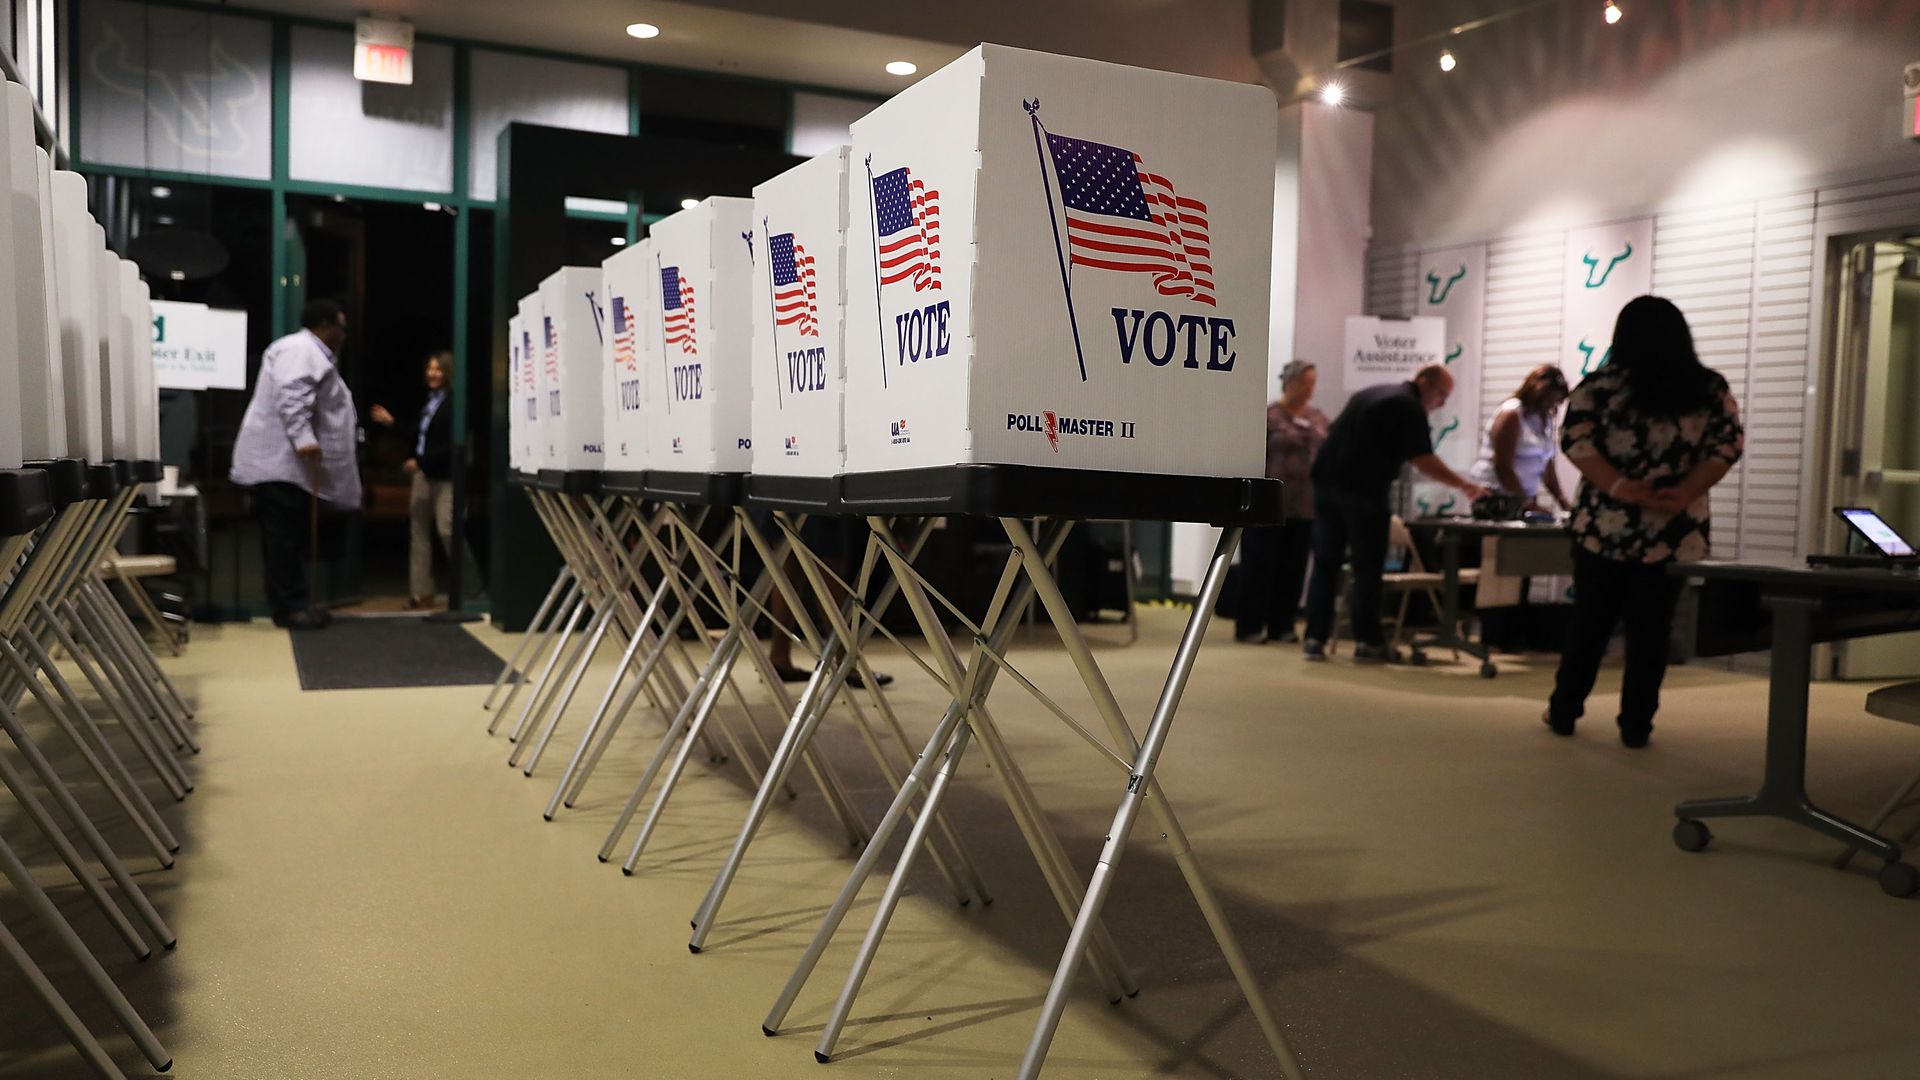 In this image, a row of voting booths are seen in a room with darkened windows.